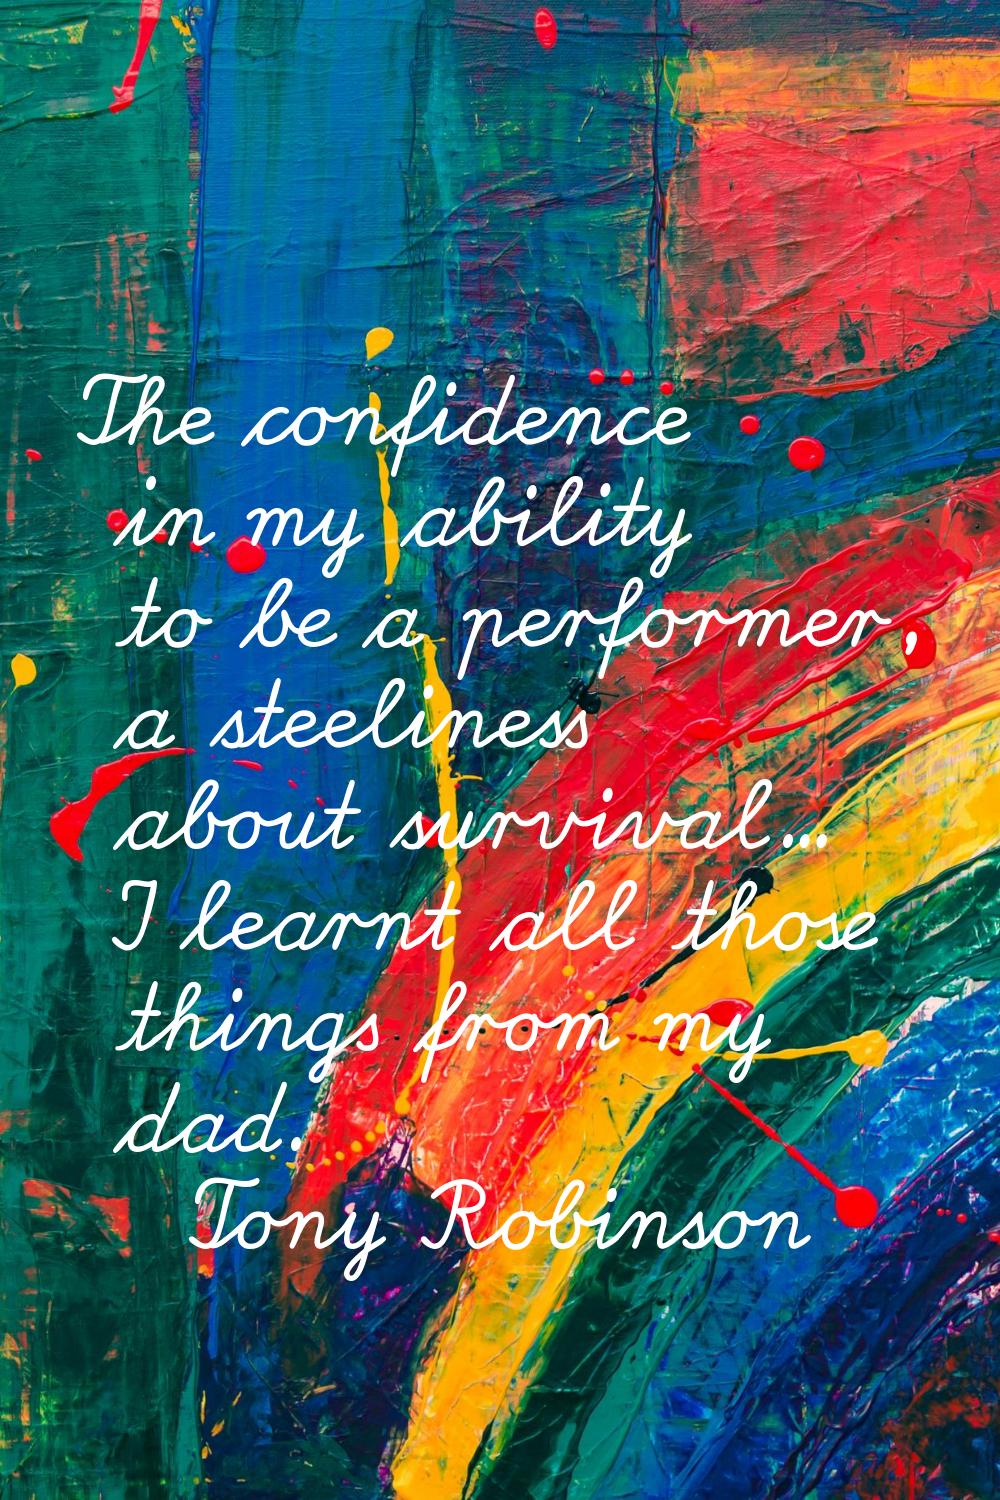 The confidence in my ability to be a performer, a steeliness about survival... I learnt all those t